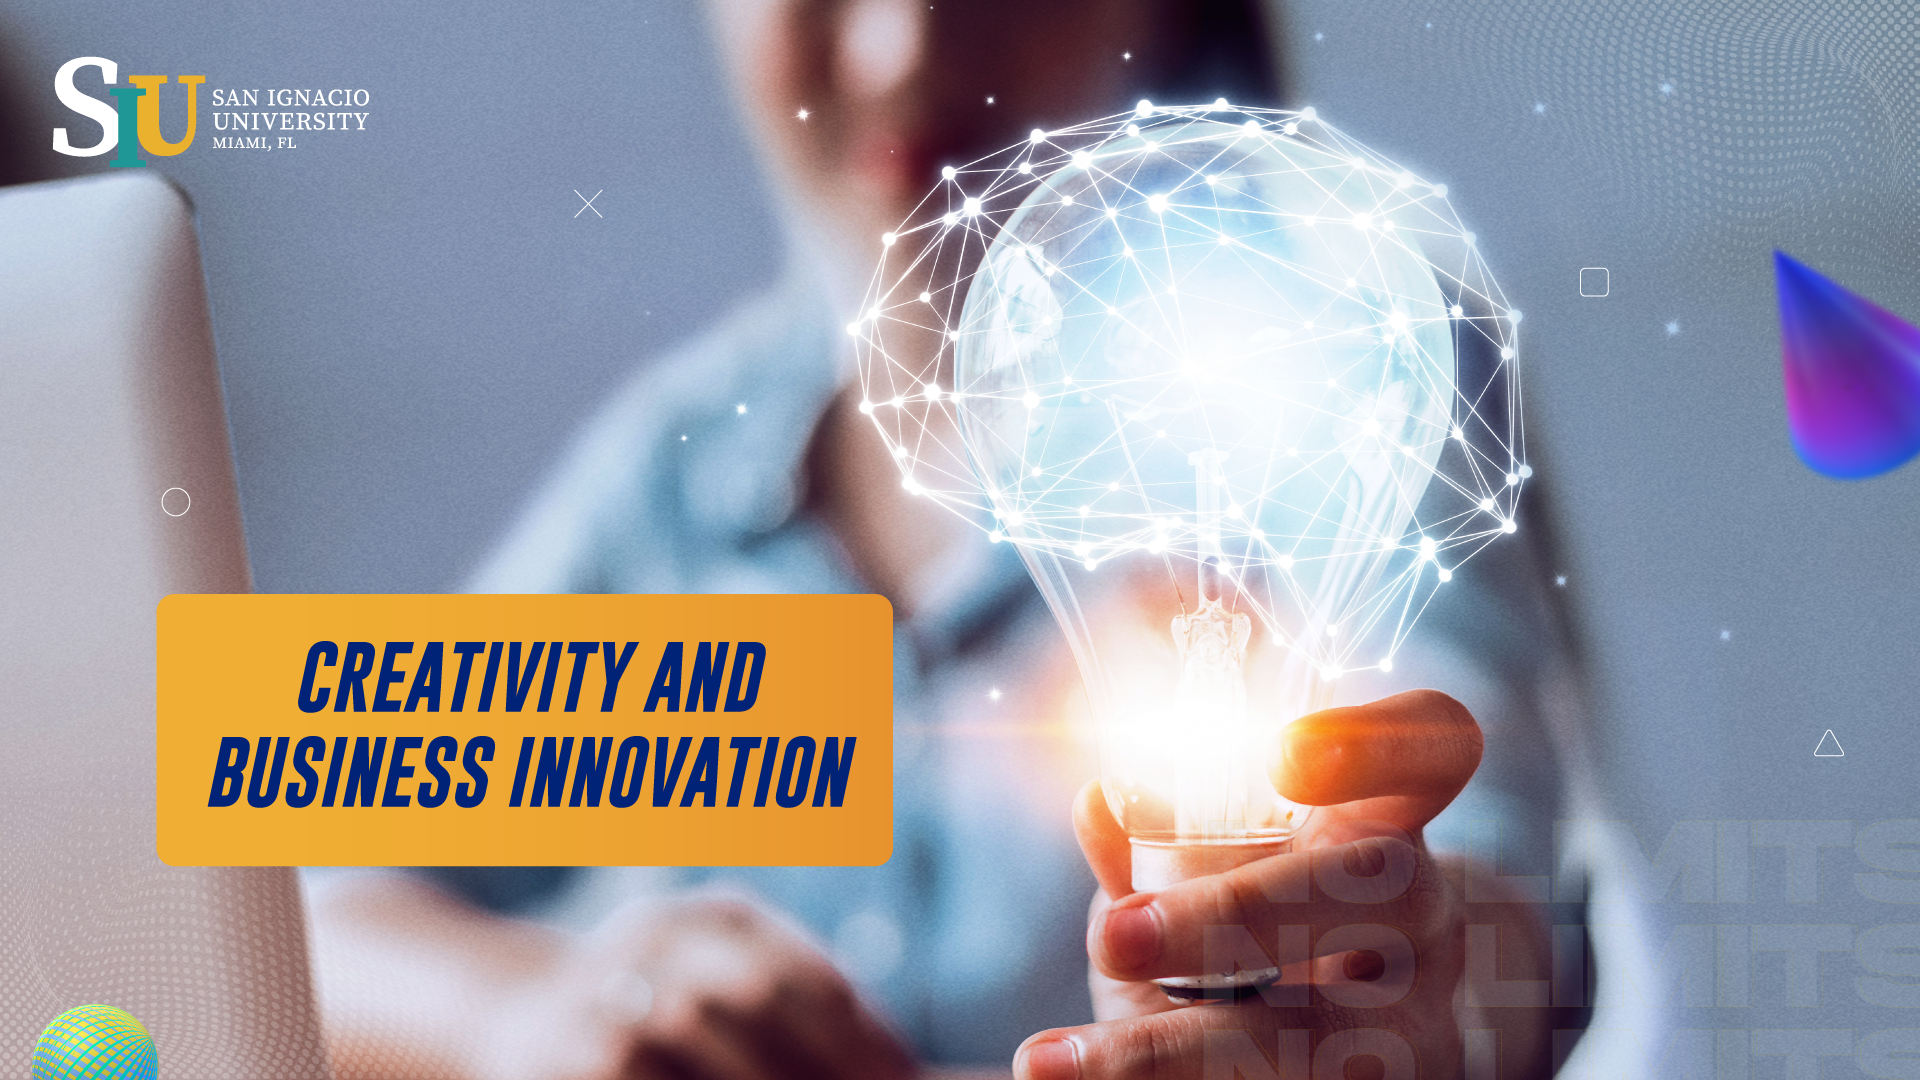 Creativity and business innovation by Pamela Riveros Paredes